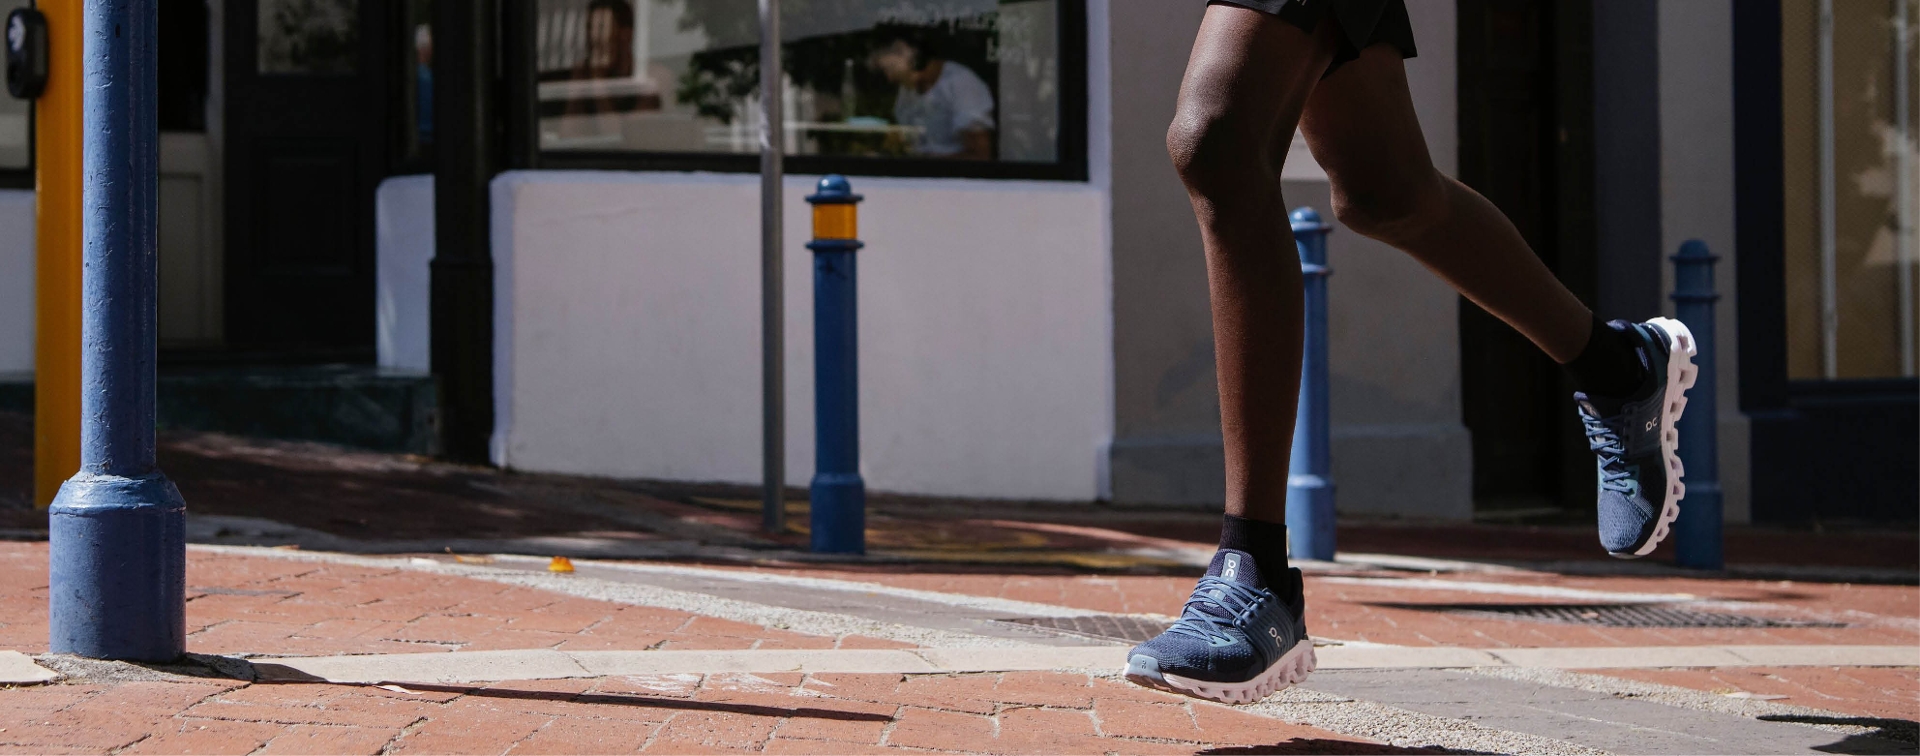 up close shot of guy running wearing blue shoes on a brick sidewalk